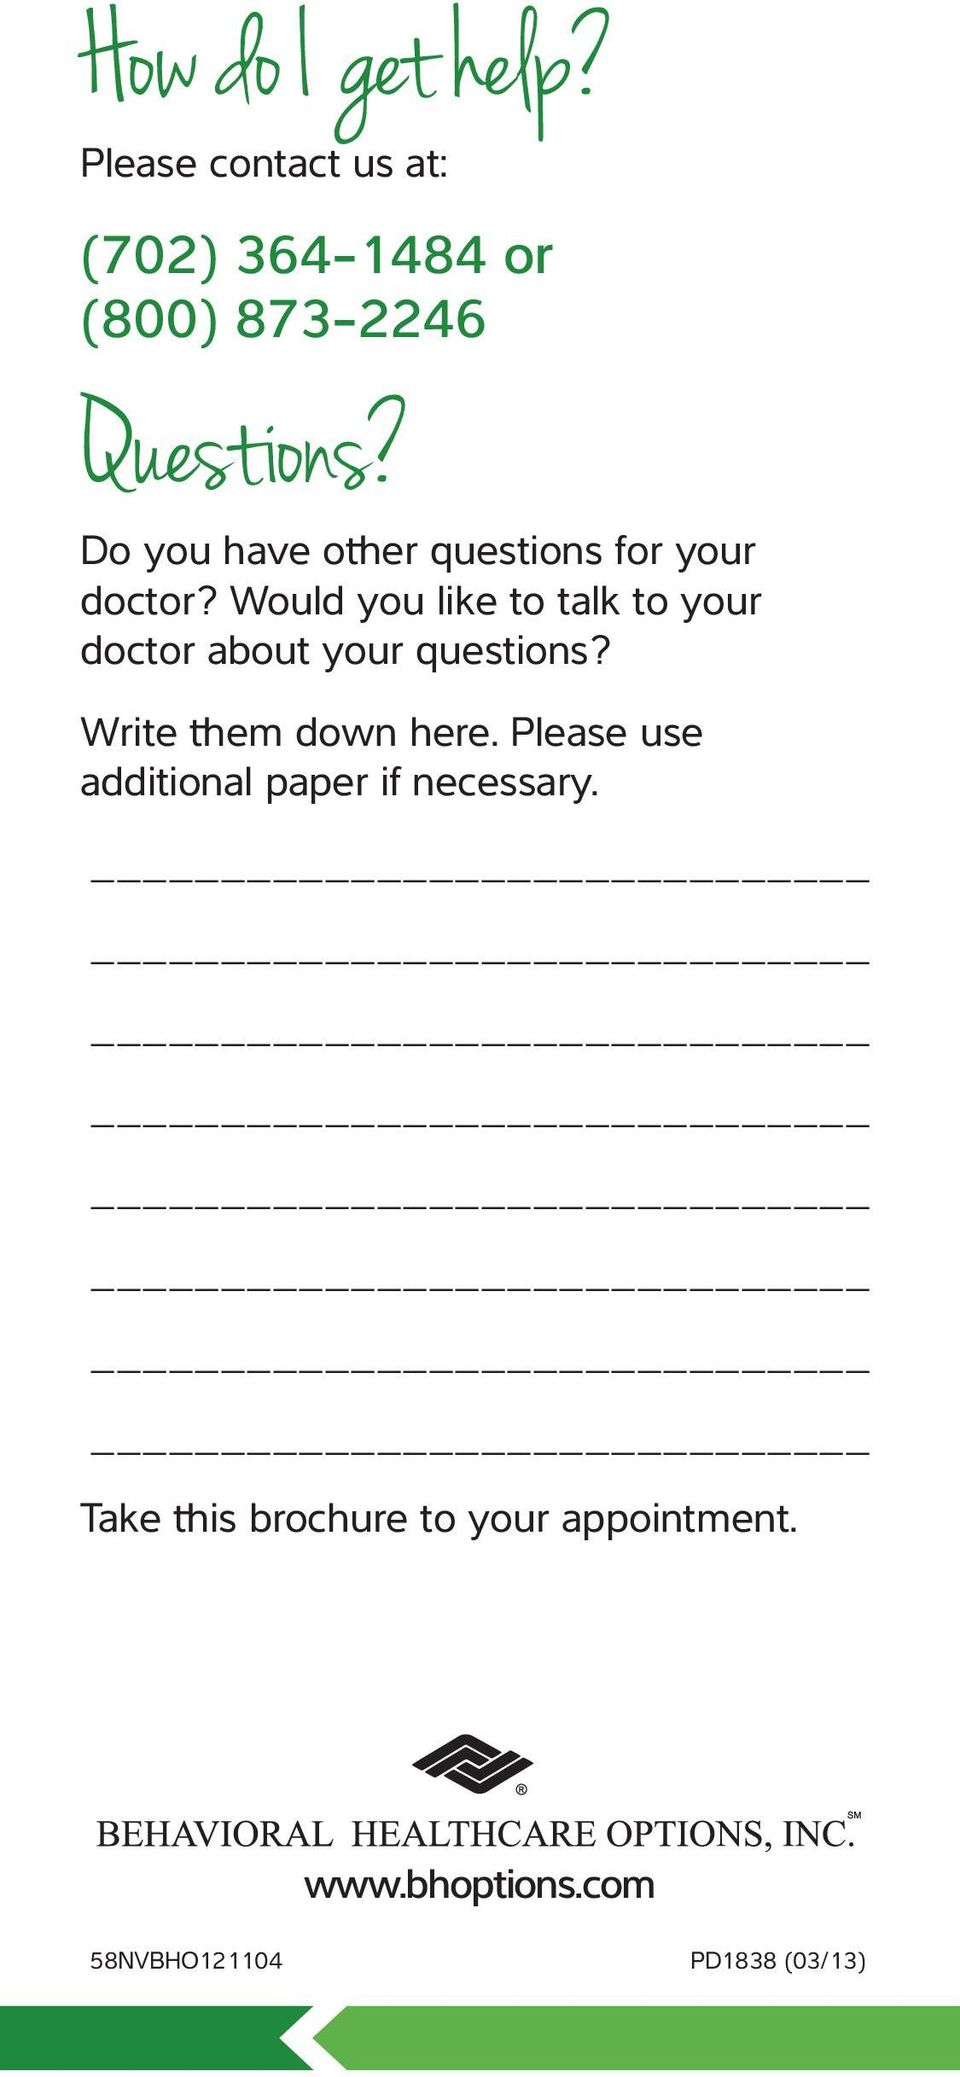 Would you like to talk to your doctor about your questions? Write them down here.